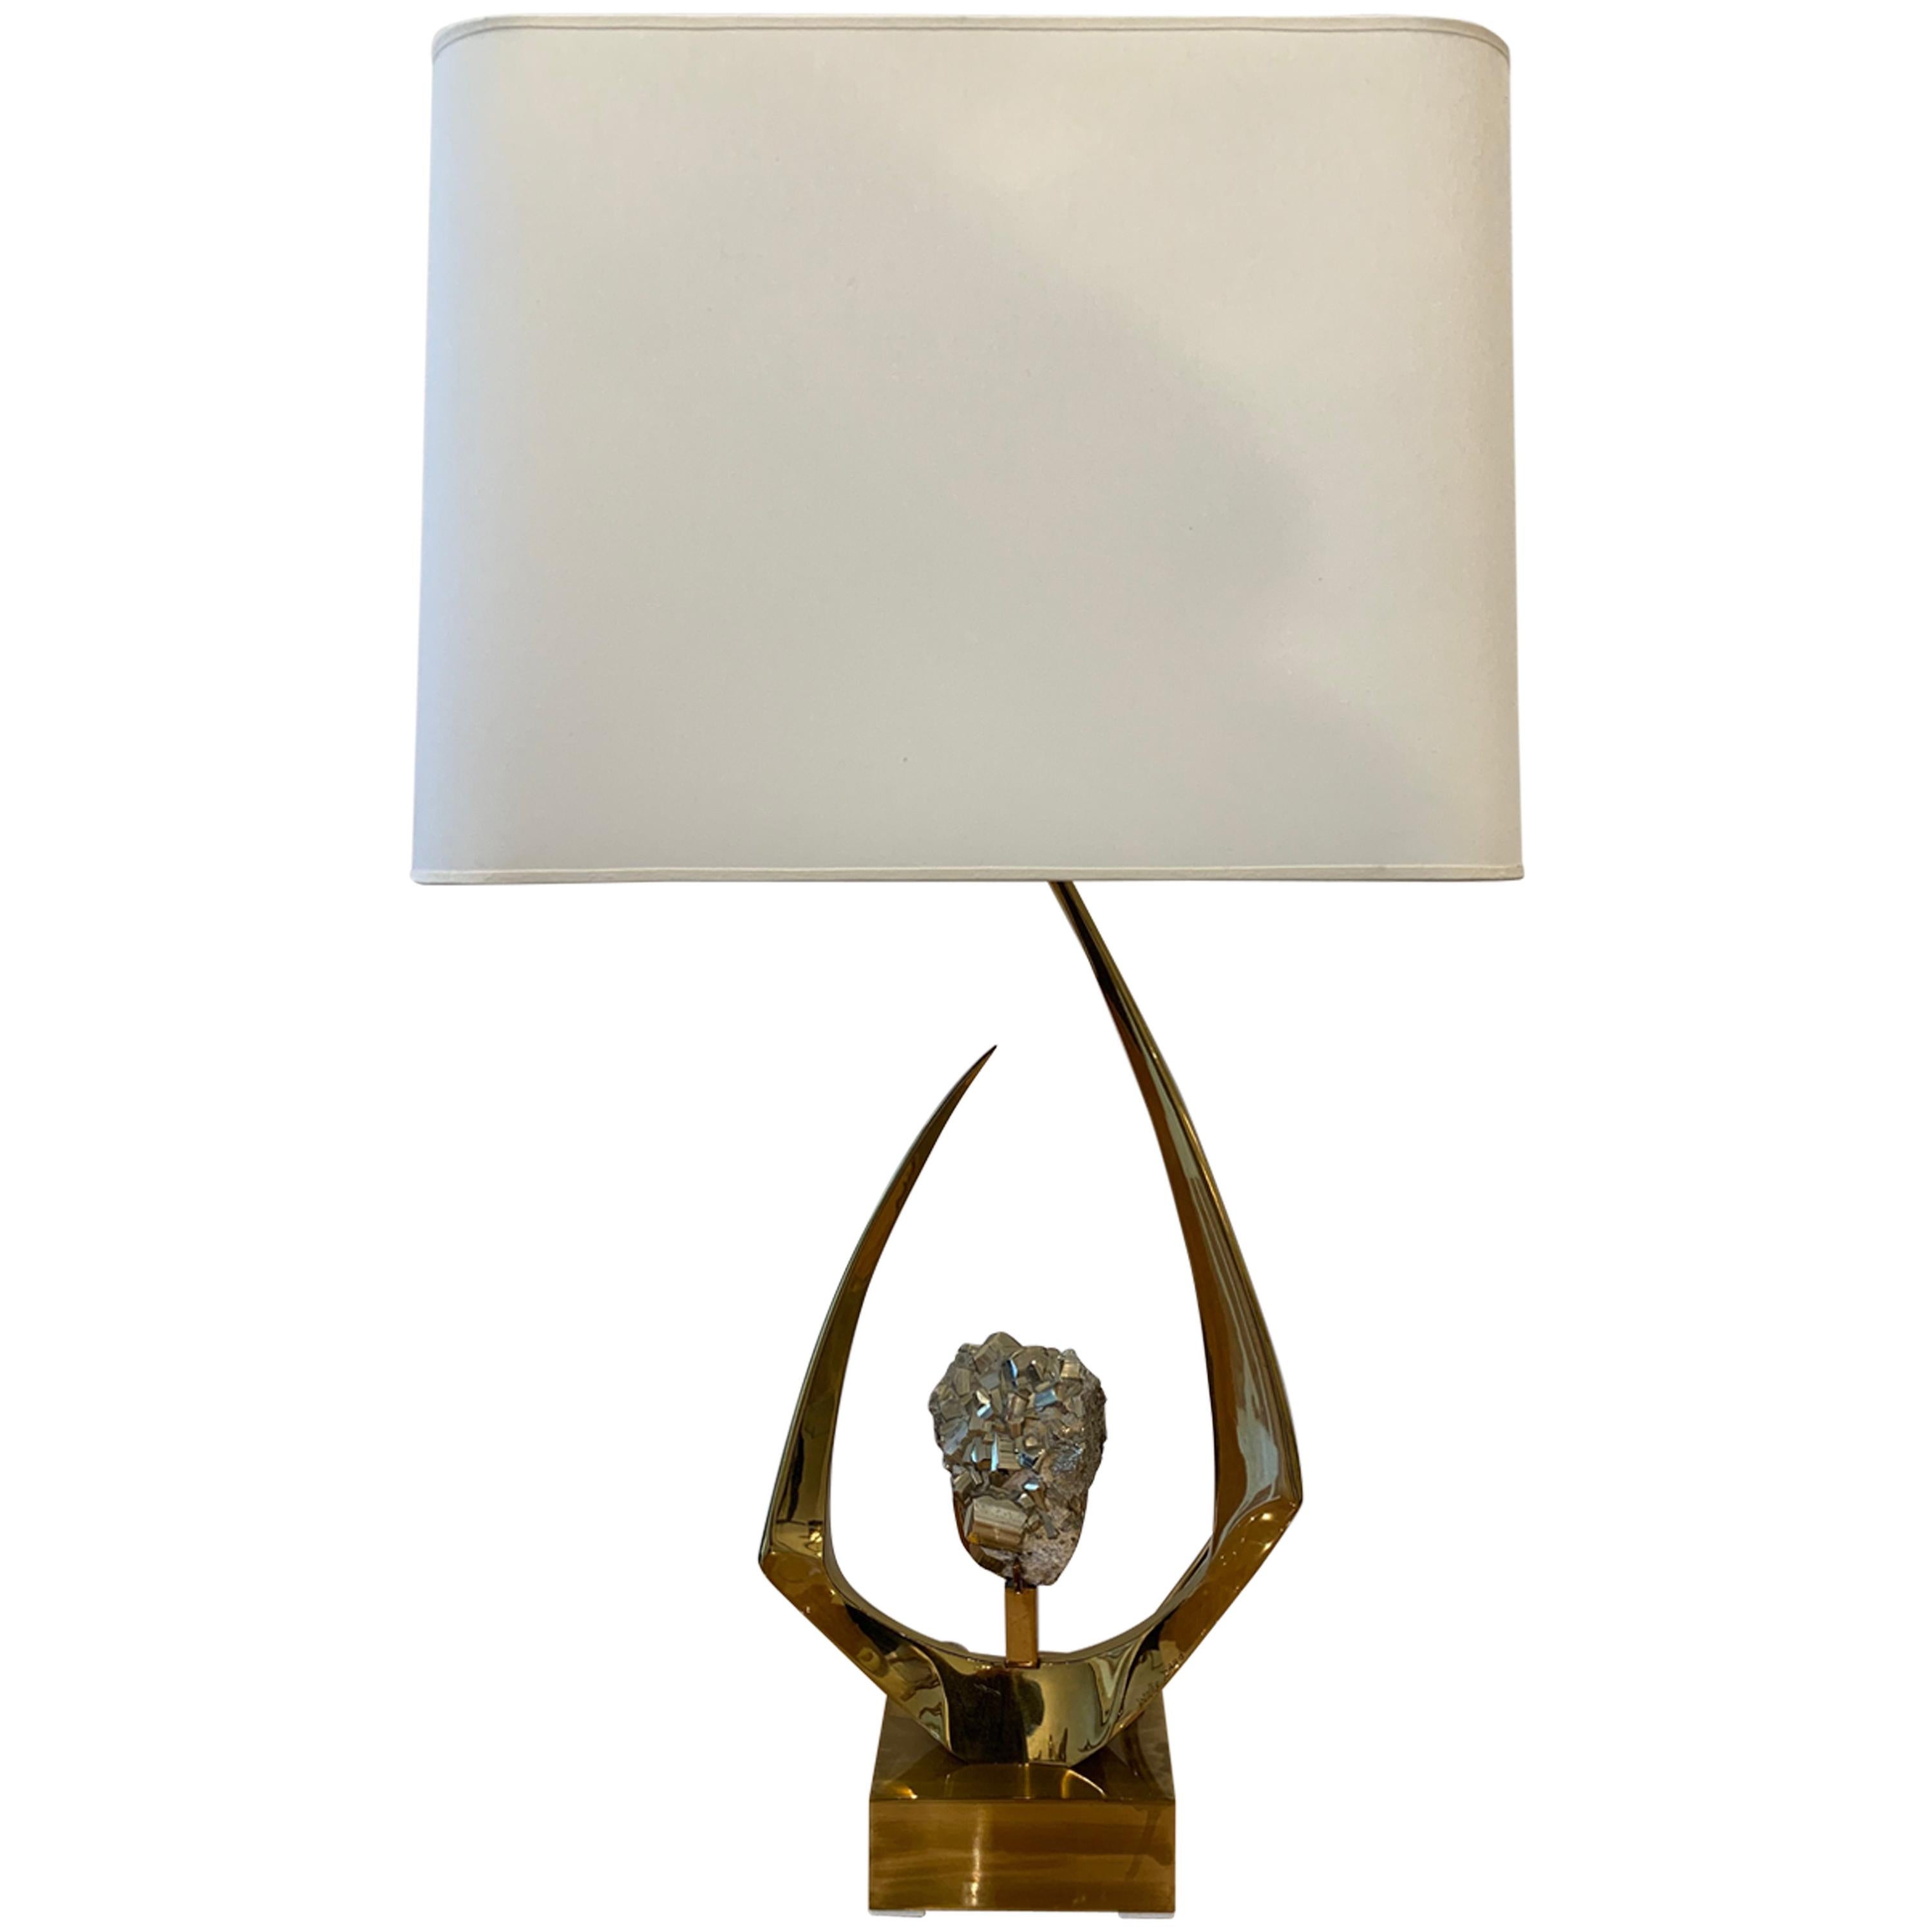 Willy Daro Lamp, Signed, 1970s